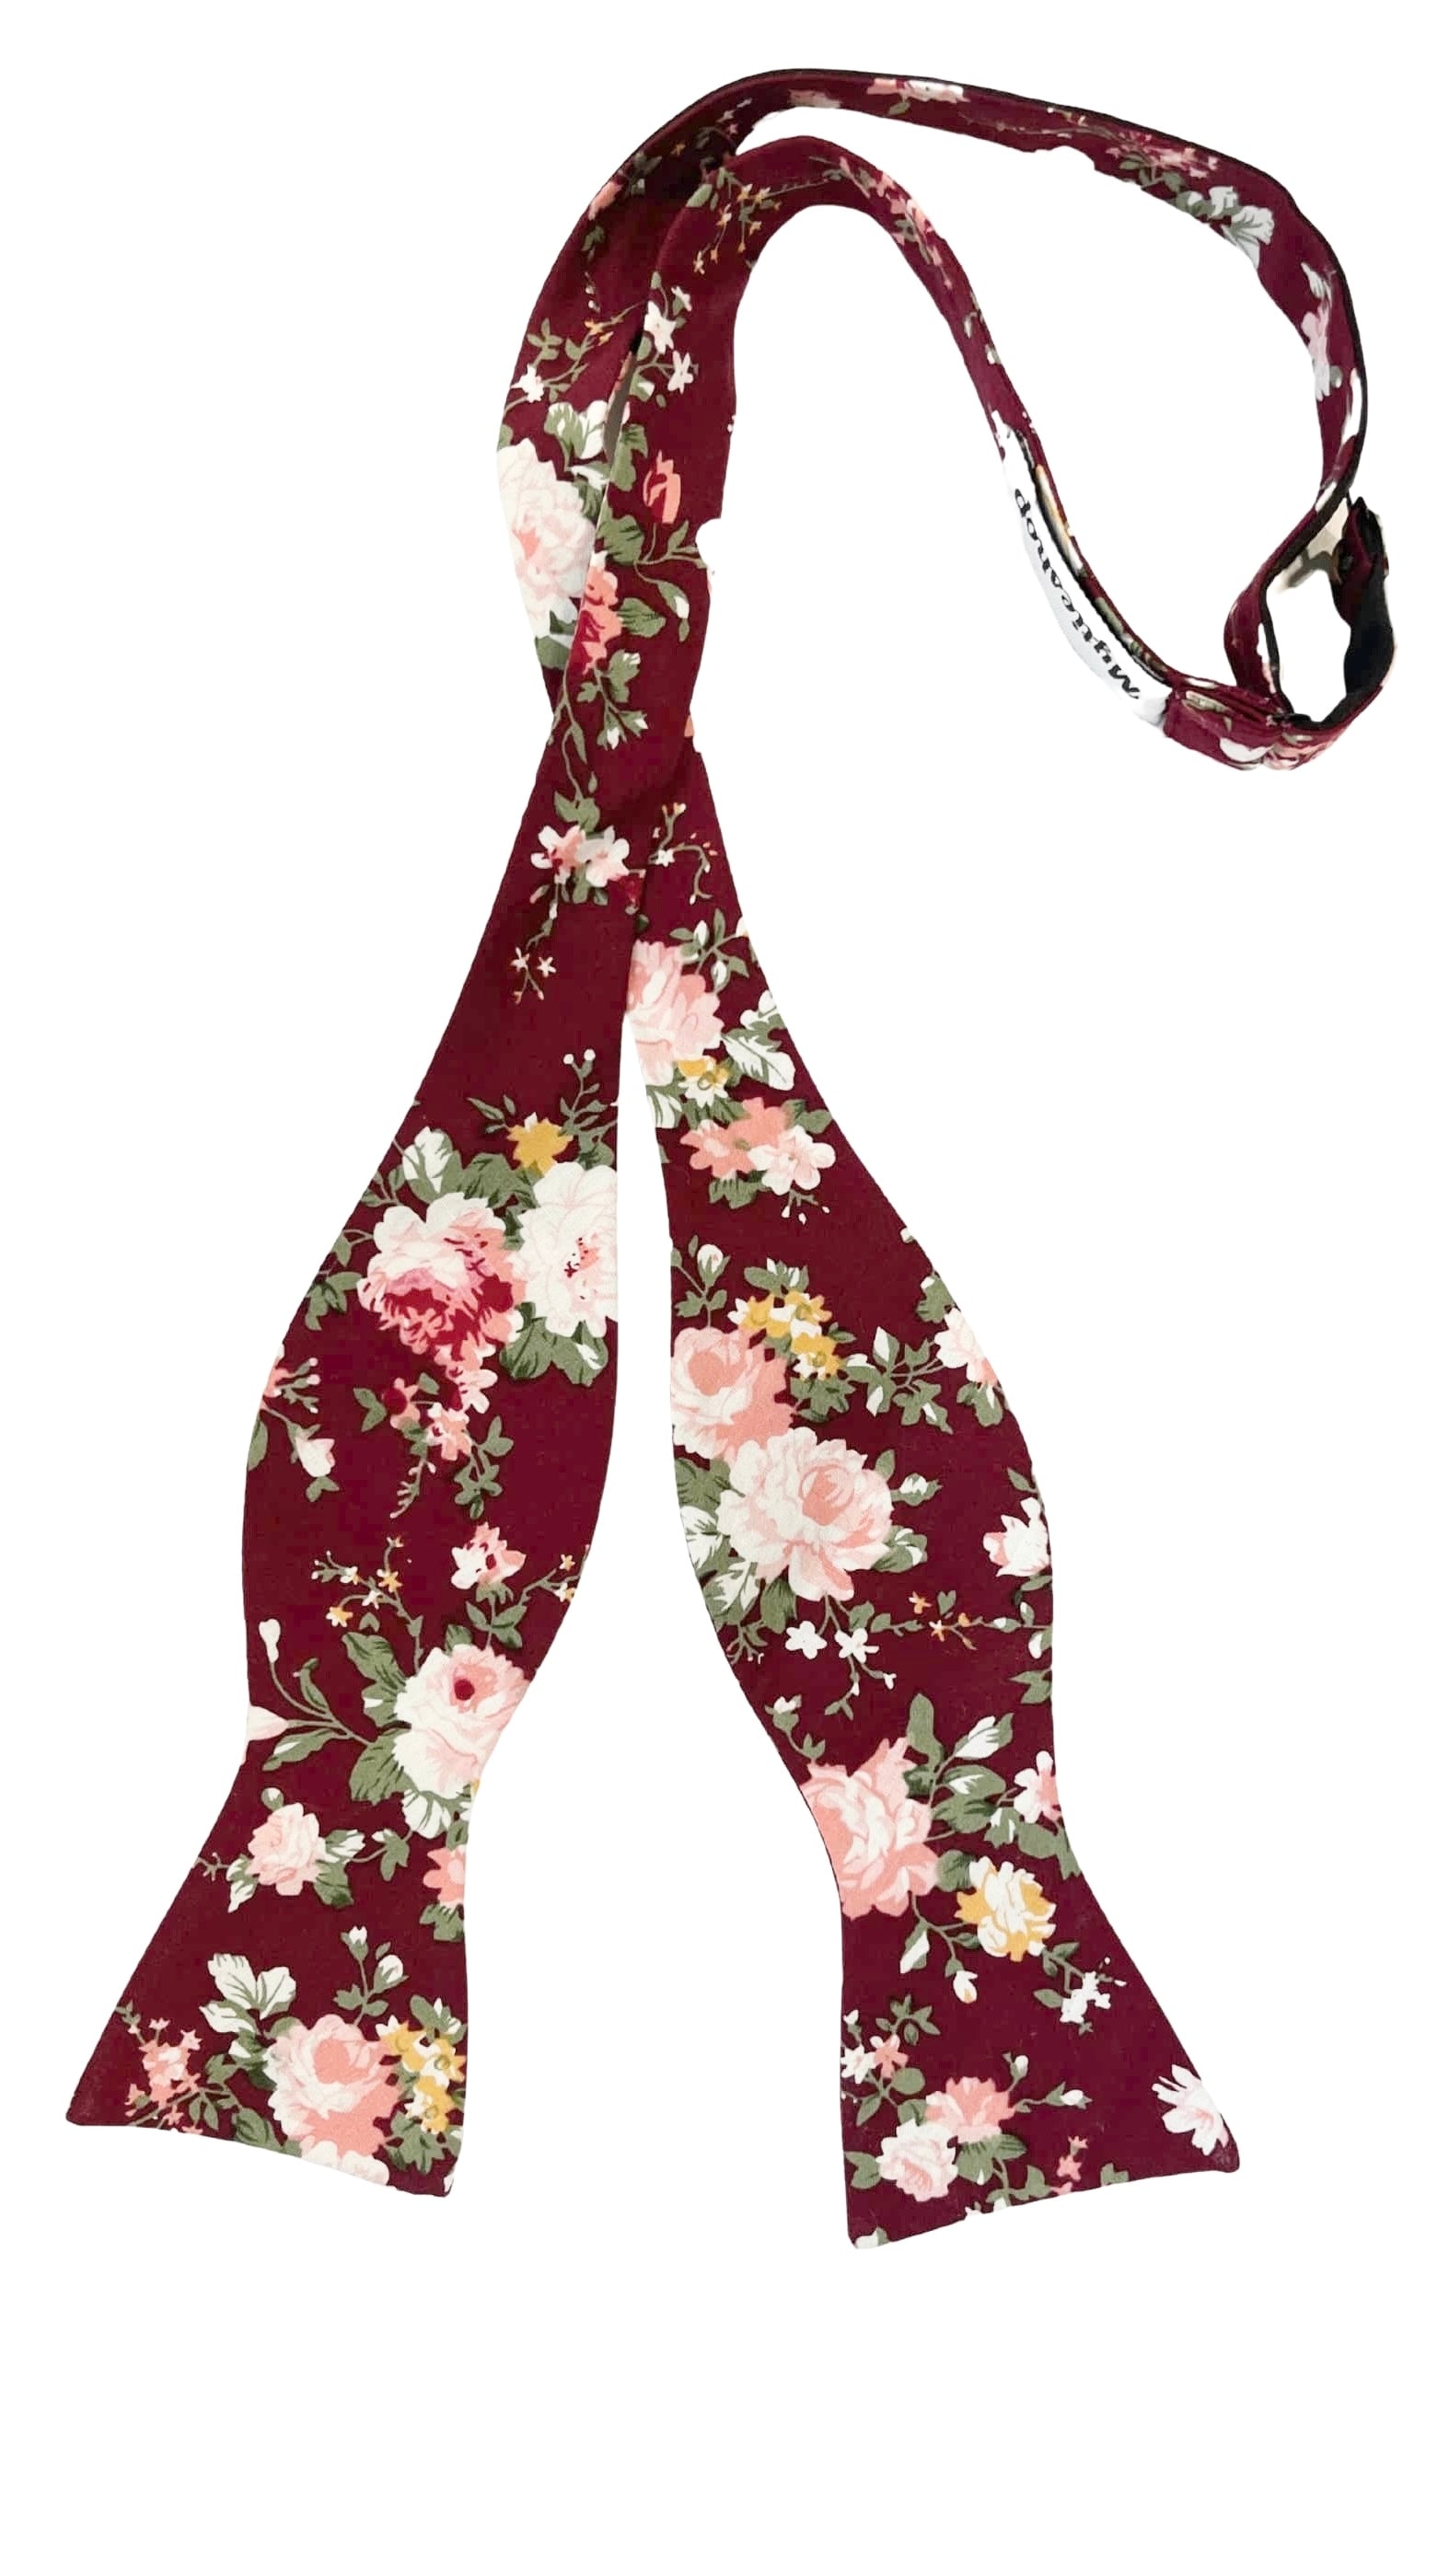 Burgundy Floral Bow Tie Self Tie WESLEY - MYTIESHOP-Burgundy Floral Bow Tie Self Tie 100% Cotton Flannel Handmade Adjustable to fit most neck sizes 13 3/4" - 18" Color: Burgundy Be the best-dressed man in the room with this WESLEY Bow Tie in Burgundy. Mytieshop's bow ties are perfect for any formal occasion. Whether you're the groom at your own wedding or attending a friend's big day, this bow tie will have you looking your sharpest. The Burgundy hue is perfect for the fall and winter months, an